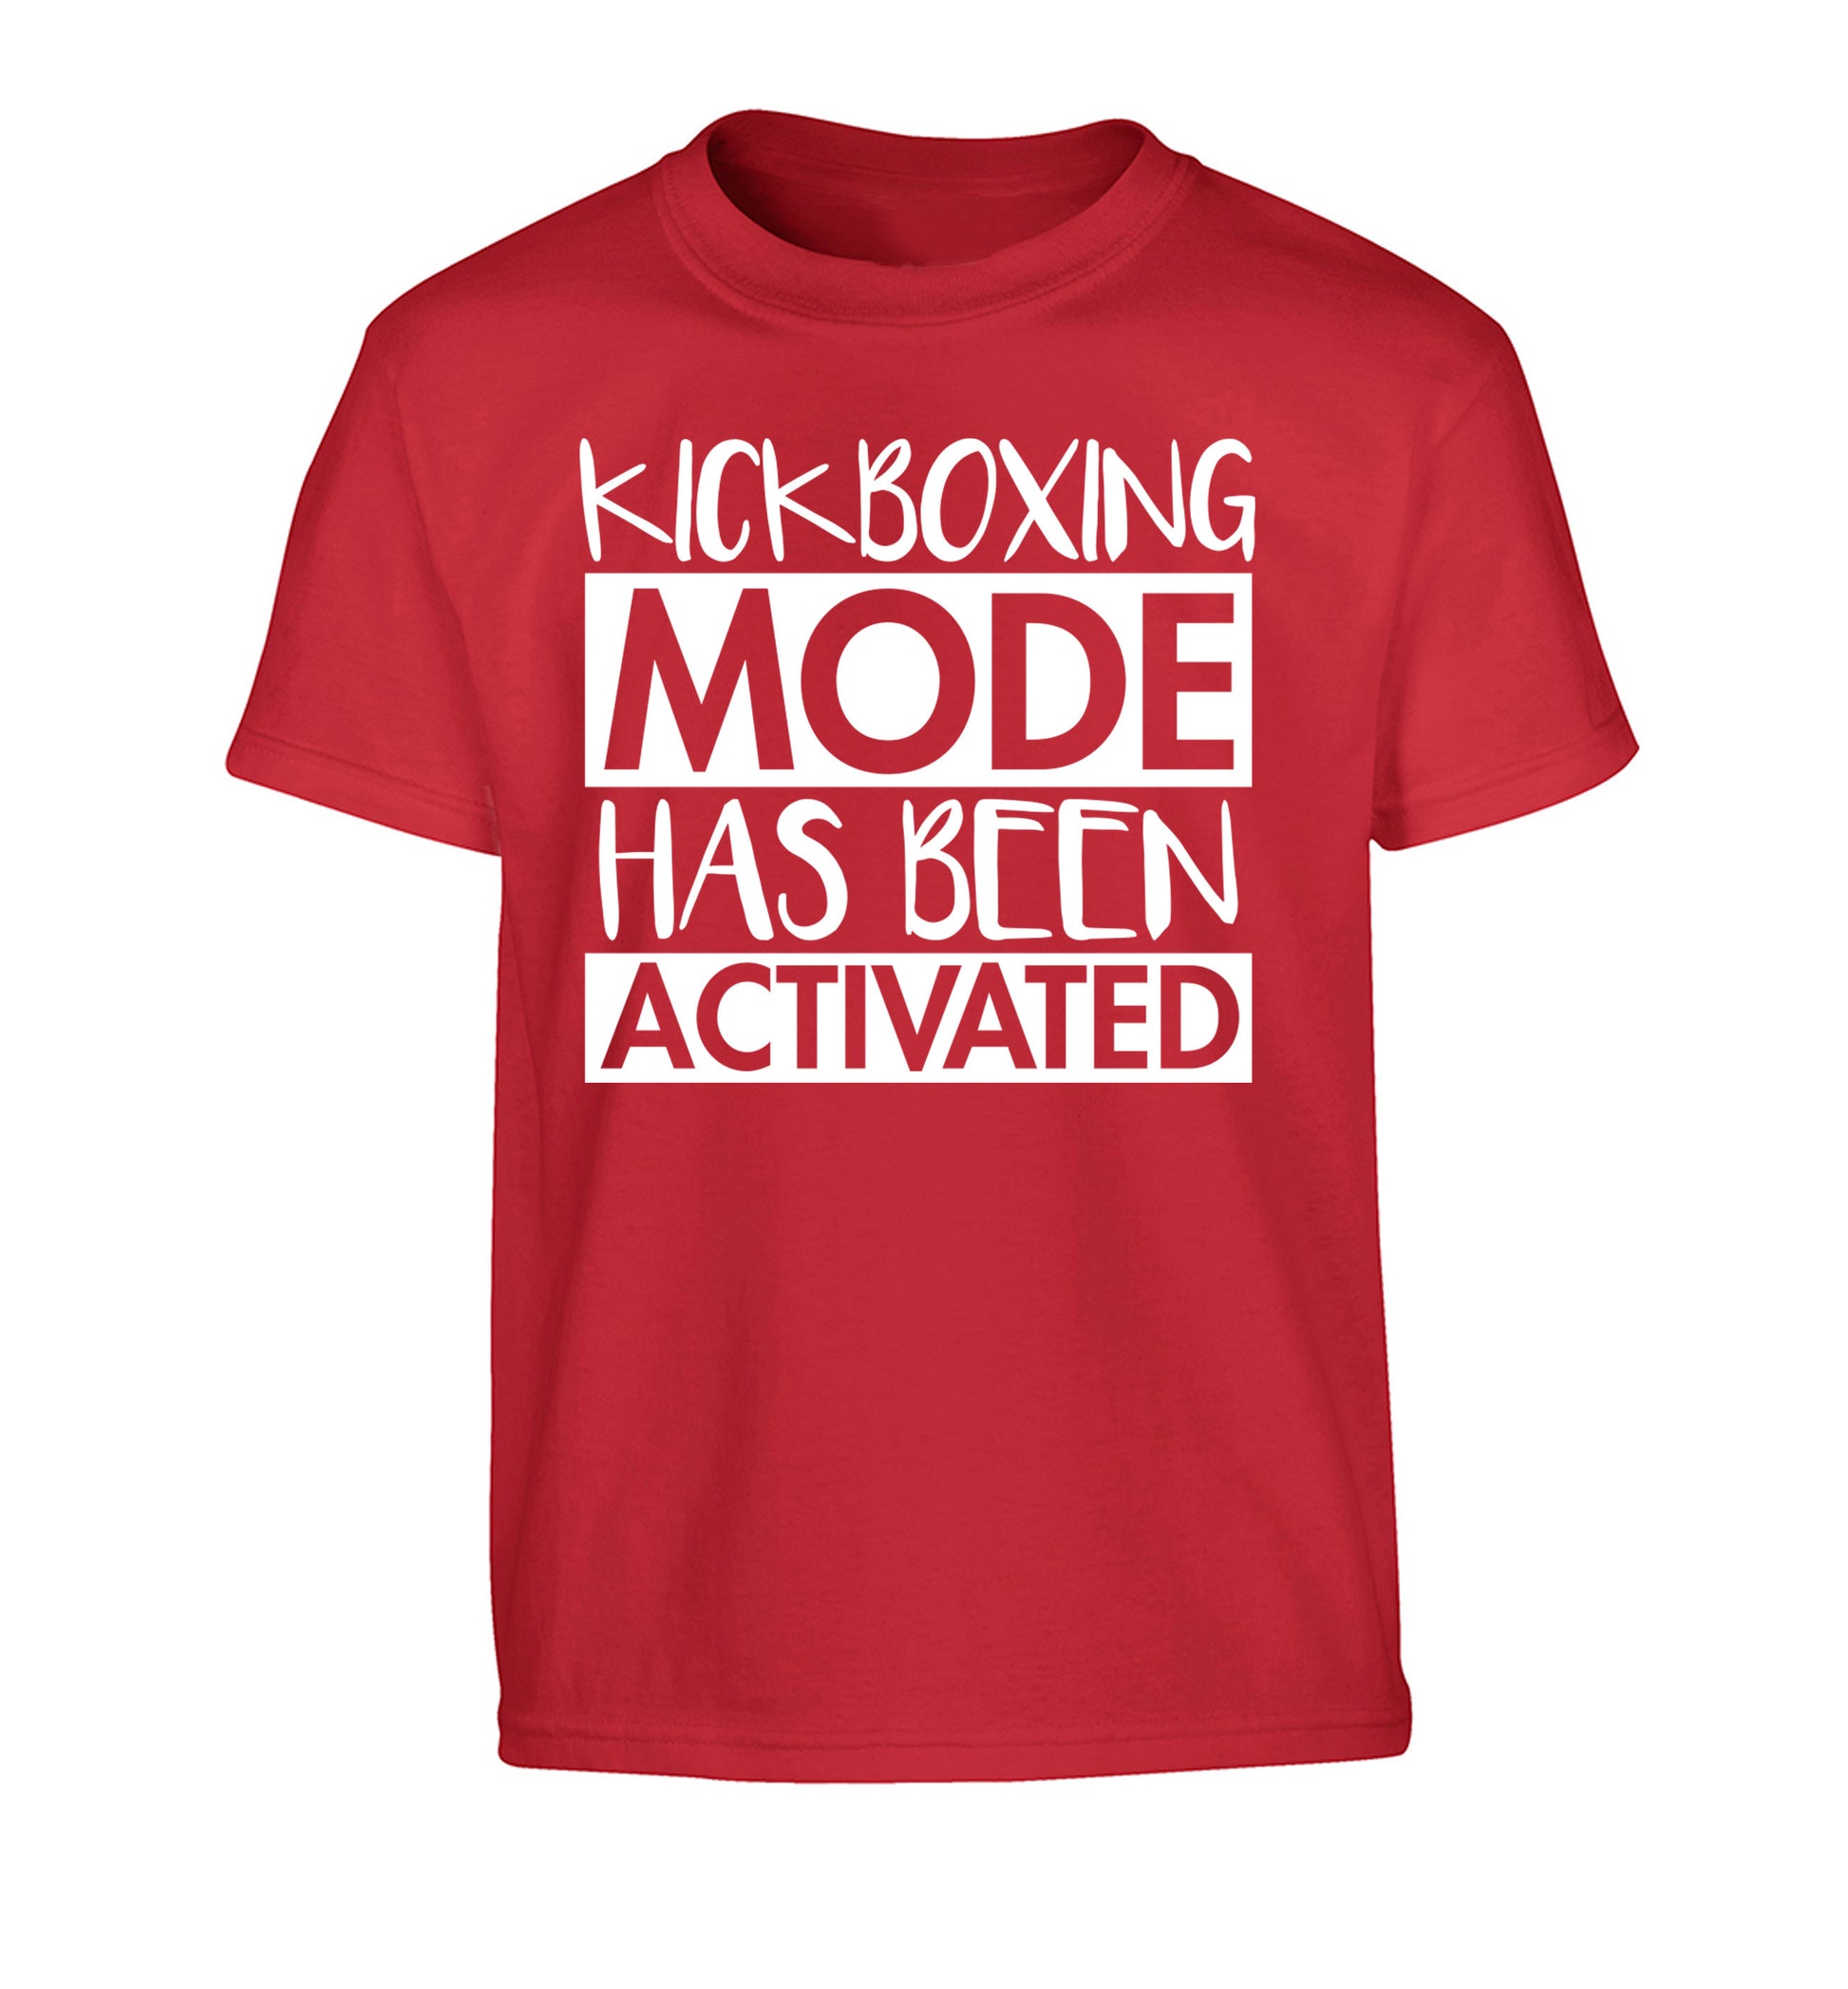 Kickboxing mode activated Children's red Tshirt 12-14 Years